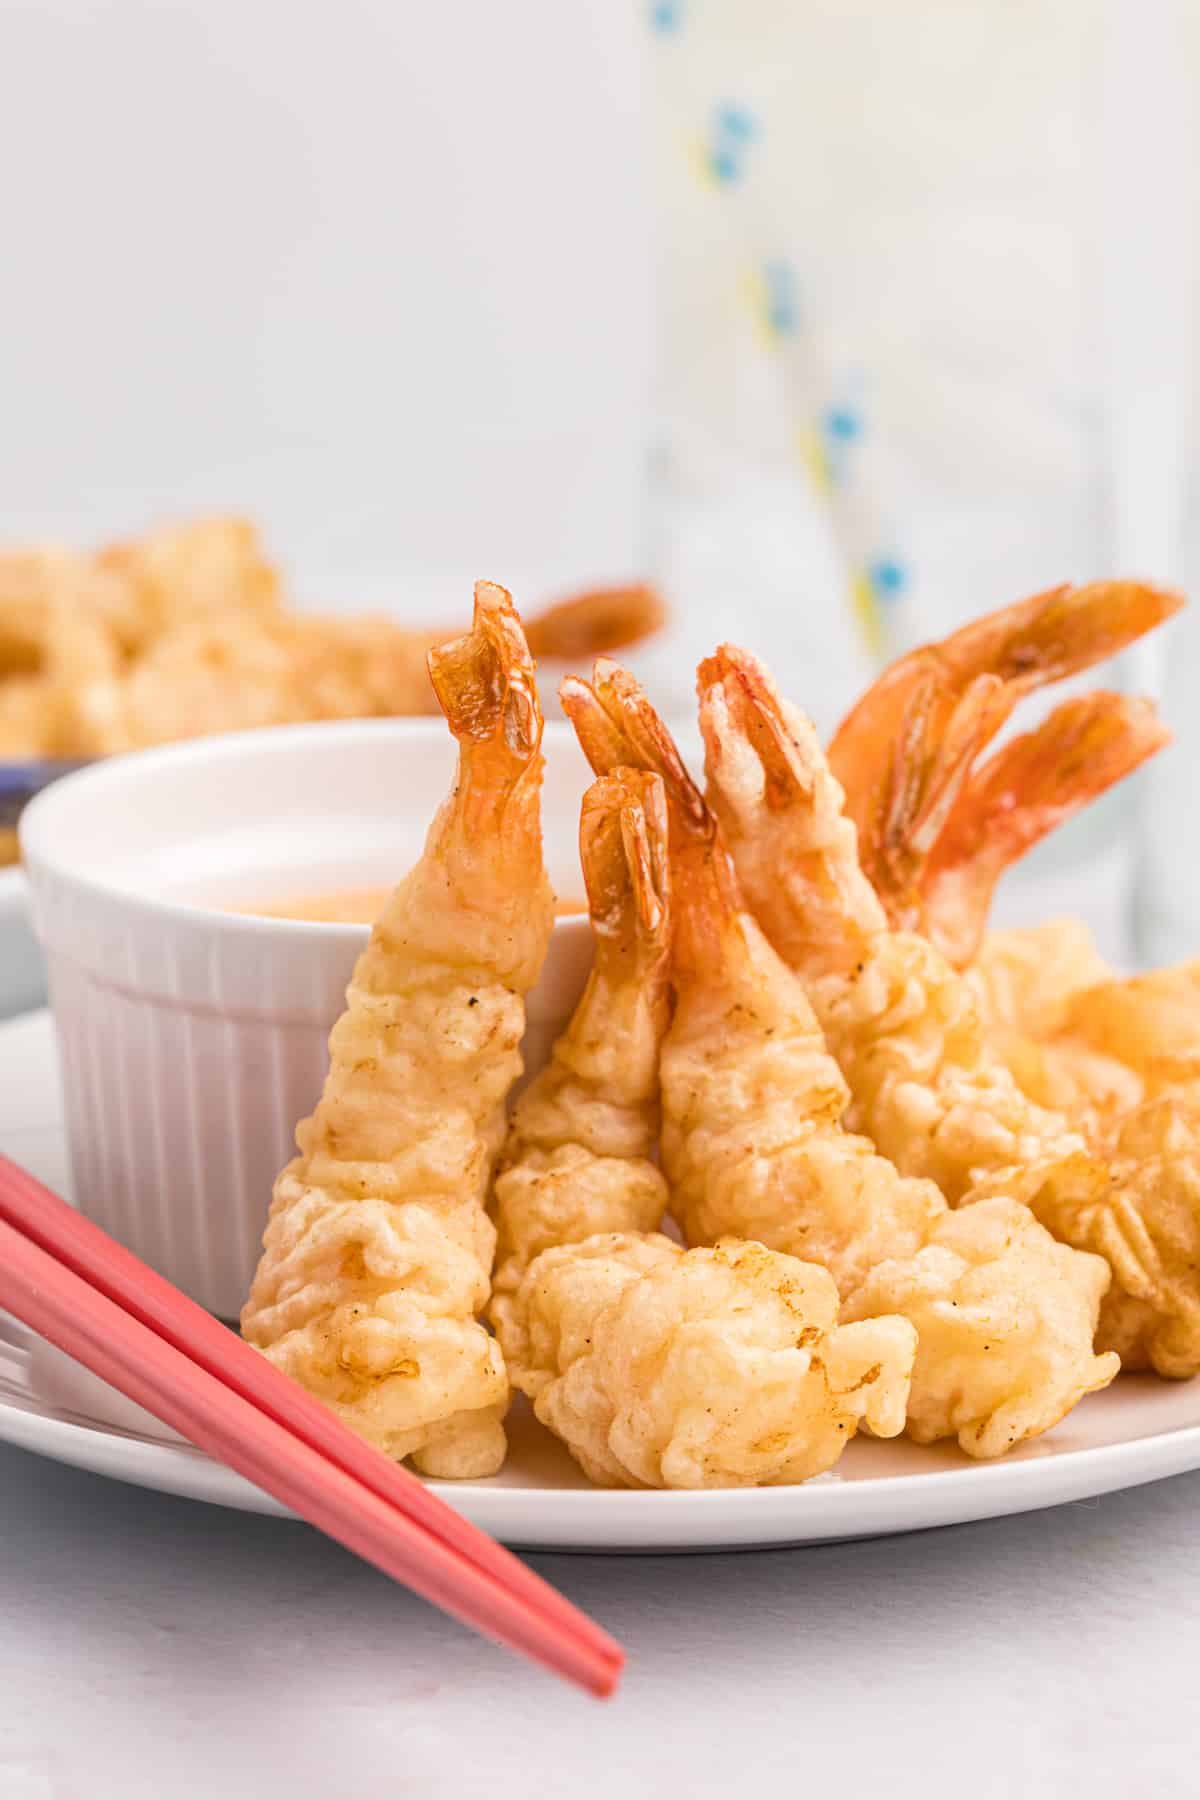 Several fried shrimp are placed next to dipping sauce.